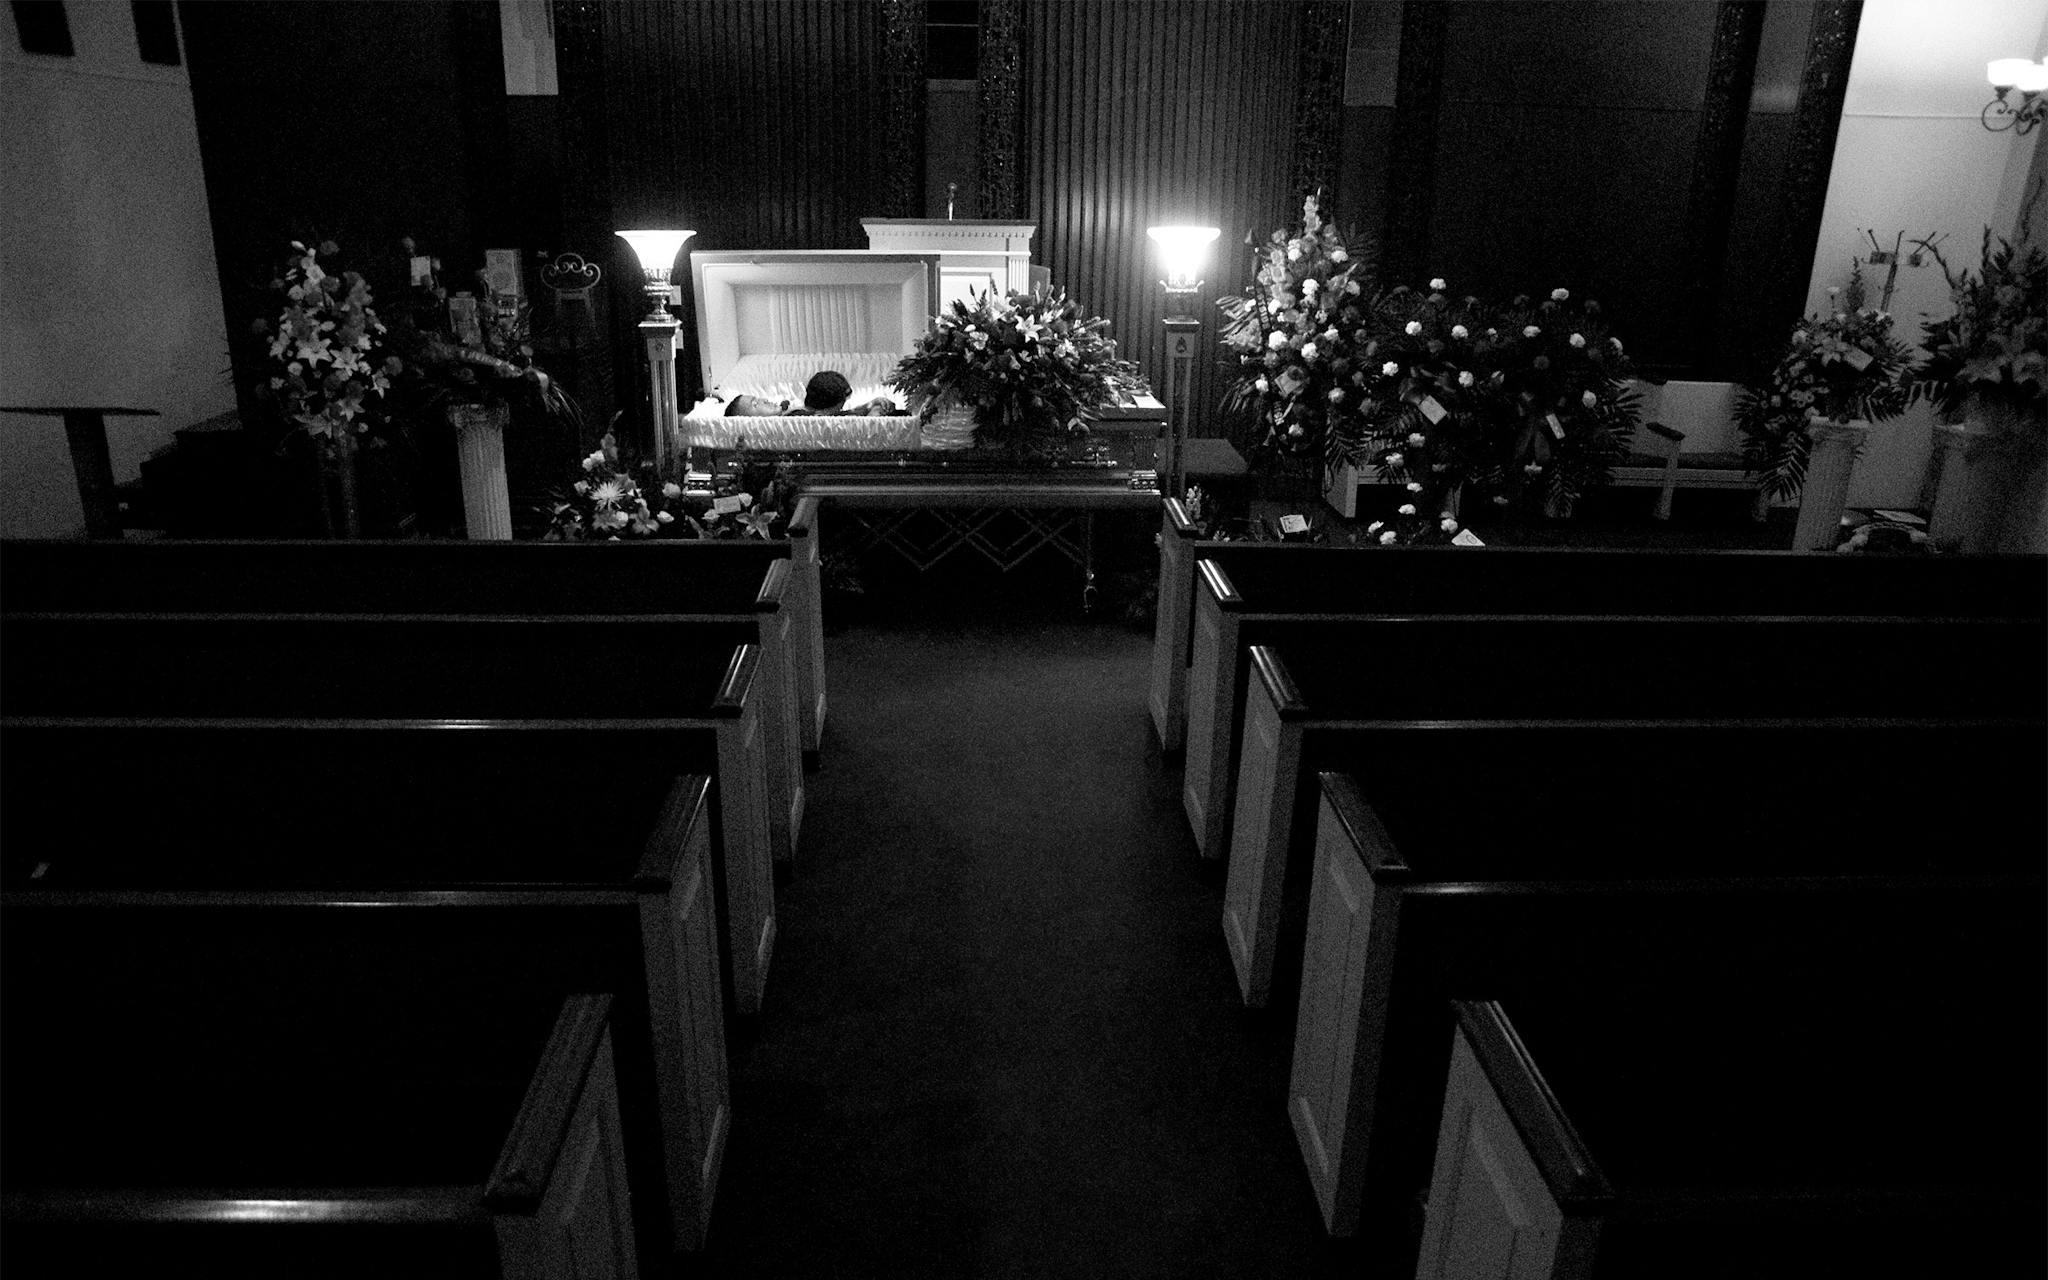 Christian’s body lies in a casket after a private visitation for family and friends at King-Tears Mortuary in East Austin on April 23, 2010.